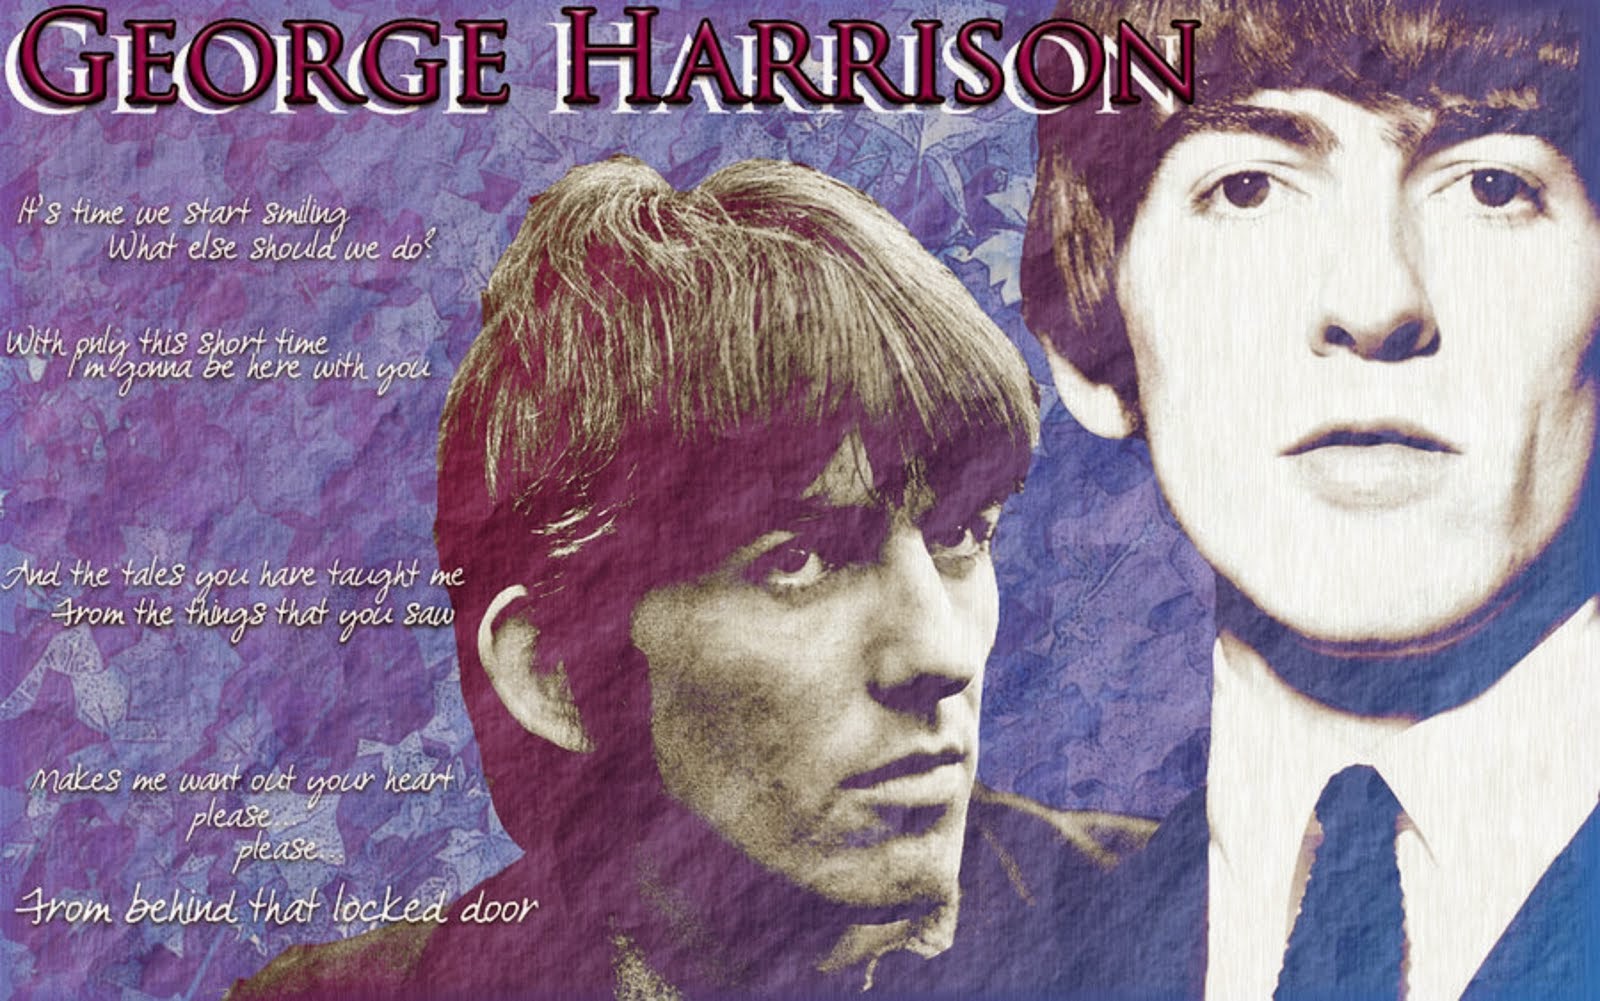 BEATLE GEORGE HARRISON - "AWAITING ON YOU ALL" - CONCERT FOR BANGLADESH